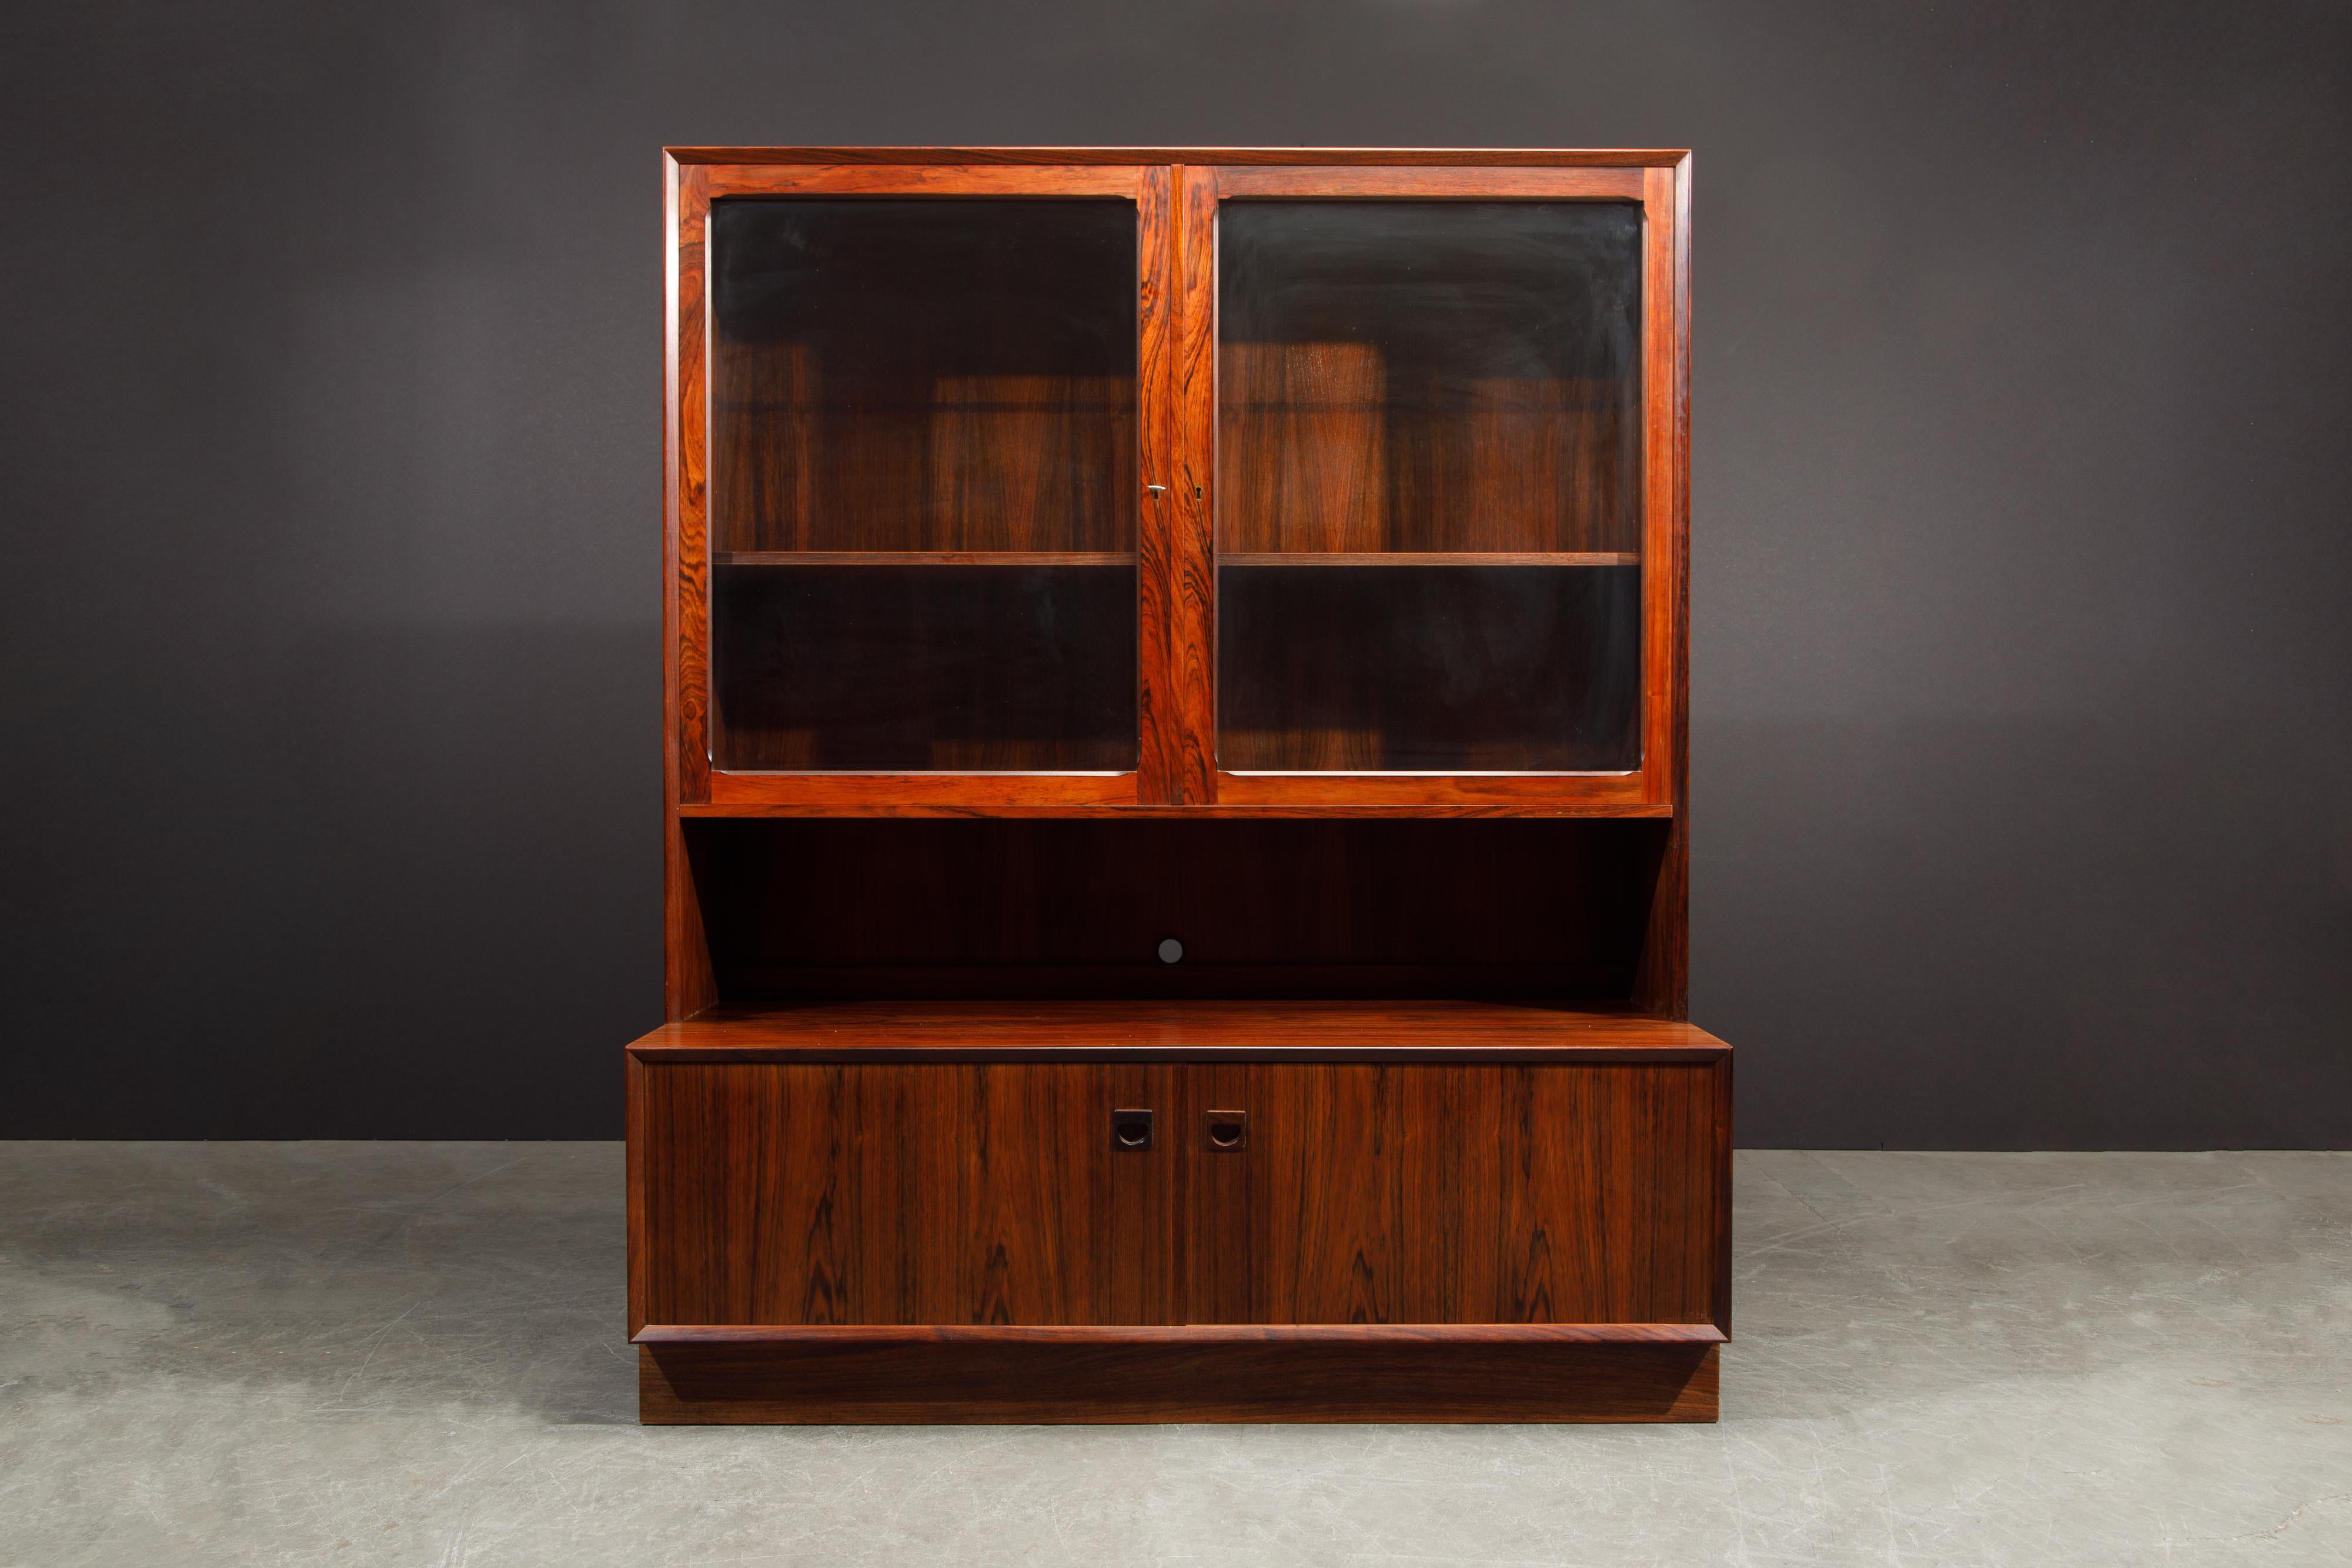 A beautiful 1960s Mid-Century Modern vitrine in rosewood that possesses incredible grain detail by Eric Brouer for Brouer Møbelfabrik, Denmark. A glass display china cabinet sits atop a rosewood credenza and within the two glass doors are two wood